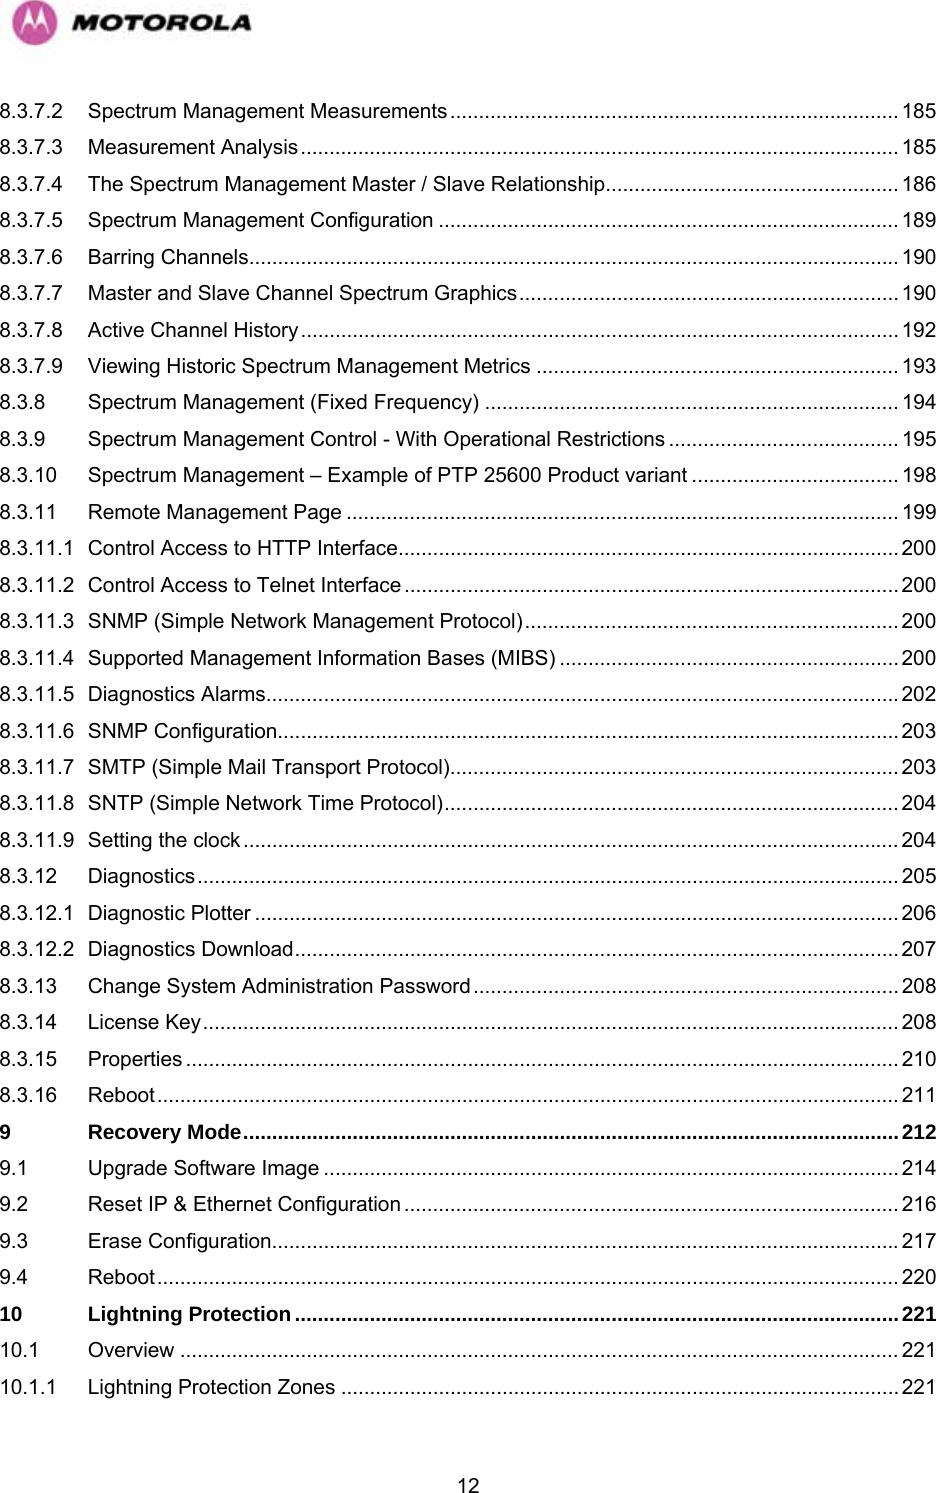   128.3.7.2 Spectrum Management Measurements.............................................................................. 185 8.3.7.3 Measurement Analysis........................................................................................................ 185 8.3.7.4 The Spectrum Management Master / Slave Relationship................................................... 186 8.3.7.5 Spectrum Management Configuration ................................................................................ 189 8.3.7.6 Barring Channels................................................................................................................. 190 8.3.7.7 Master and Slave Channel Spectrum Graphics.................................................................. 190 8.3.7.8 Active Channel History ........................................................................................................ 192 8.3.7.9 Viewing Historic Spectrum Management Metrics ............................................................... 193 8.3.8 Spectrum Management (Fixed Frequency) ........................................................................ 194 8.3.9 Spectrum Management Control - With Operational Restrictions ........................................ 195 8.3.10 Spectrum Management – Example of PTP 25600 Product variant .................................... 198 8.3.11 Remote Management Page ................................................................................................ 199 8.3.11.1 Control Access to HTTP Interface....................................................................................... 200 8.3.11.2 Control Access to Telnet Interface ...................................................................................... 200 8.3.11.3 SNMP (Simple Network Management Protocol)................................................................. 200 8.3.11.4 Supported Management Information Bases (MIBS) ........................................................... 200 8.3.11.5 Diagnostics Alarms..............................................................................................................202 8.3.11.6 SNMP Configuration............................................................................................................ 203 8.3.11.7 SMTP (Simple Mail Transport Protocol).............................................................................. 203 8.3.11.8 SNTP (Simple Network Time Protocol)............................................................................... 204 8.3.11.9 Setting the clock .................................................................................................................. 204 8.3.12 Diagnostics.......................................................................................................................... 205 8.3.12.1 Diagnostic Plotter ................................................................................................................ 206 8.3.12.2 Diagnostics Download......................................................................................................... 207 8.3.13 Change System Administration Password.......................................................................... 208 8.3.14 License Key......................................................................................................................... 208 8.3.15 Properties ............................................................................................................................ 210 8.3.16 Reboot................................................................................................................................. 211 9 Recovery Mode..................................................................................................................212 9.1 Upgrade Software Image .................................................................................................... 214 9.2 Reset IP &amp; Ethernet Configuration ...................................................................................... 216 9.3 Erase Configuration.............................................................................................................217 9.4 Reboot................................................................................................................................. 220 10 Lightning Protection.........................................................................................................221 10.1 Overview ............................................................................................................................. 221 10.1.1 Lightning Protection Zones .................................................................................................221 